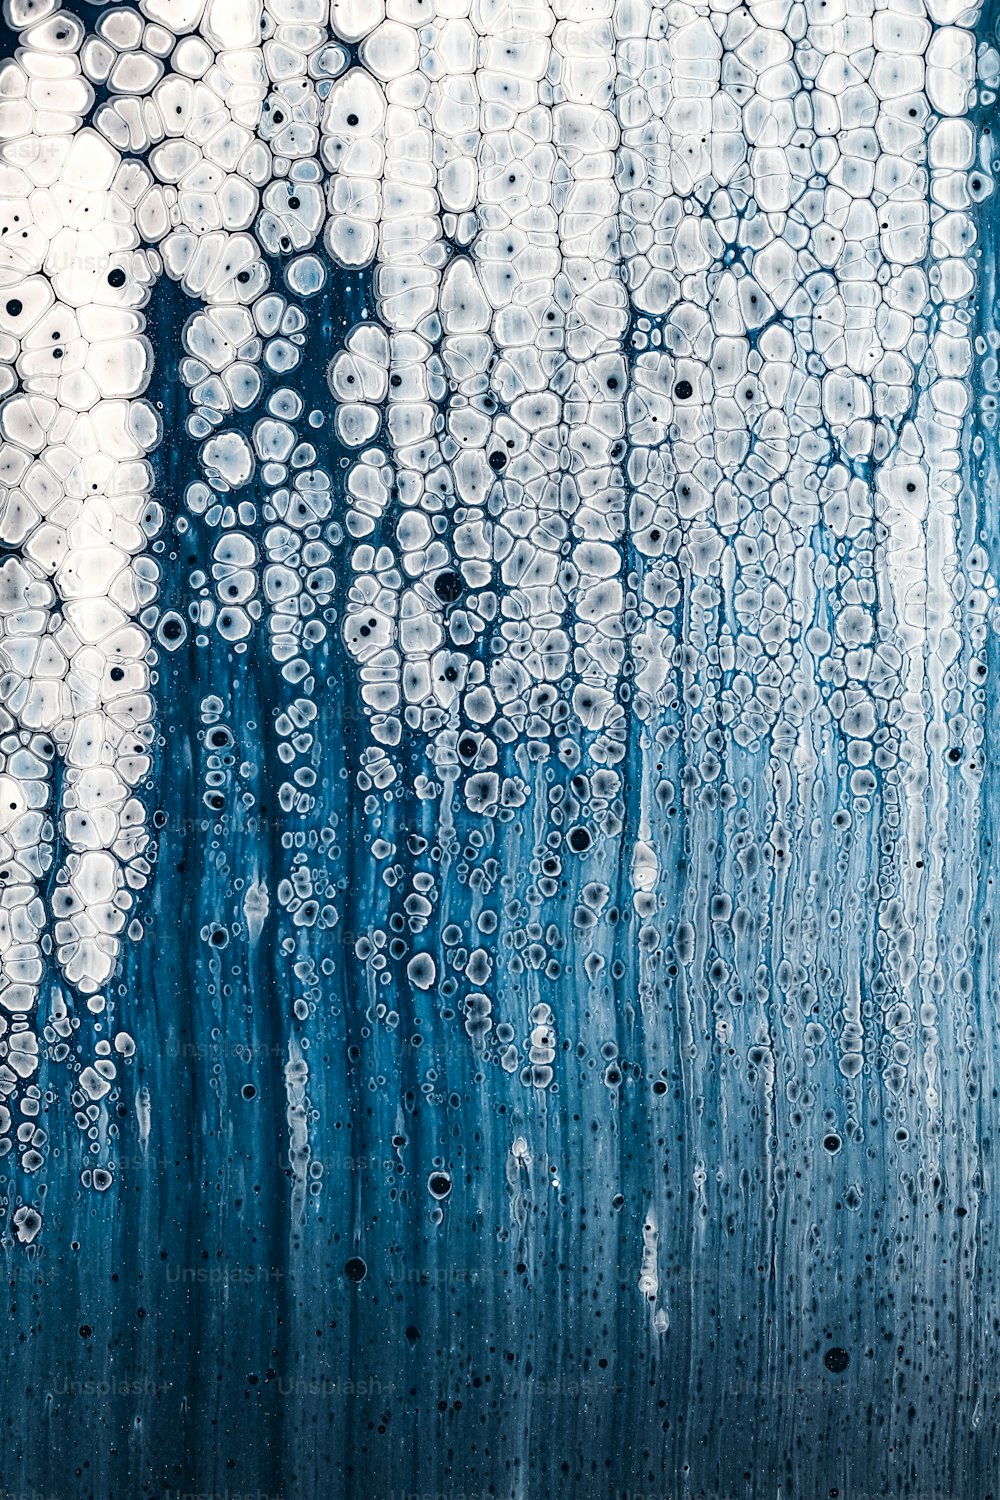 a blue and white background with water drops